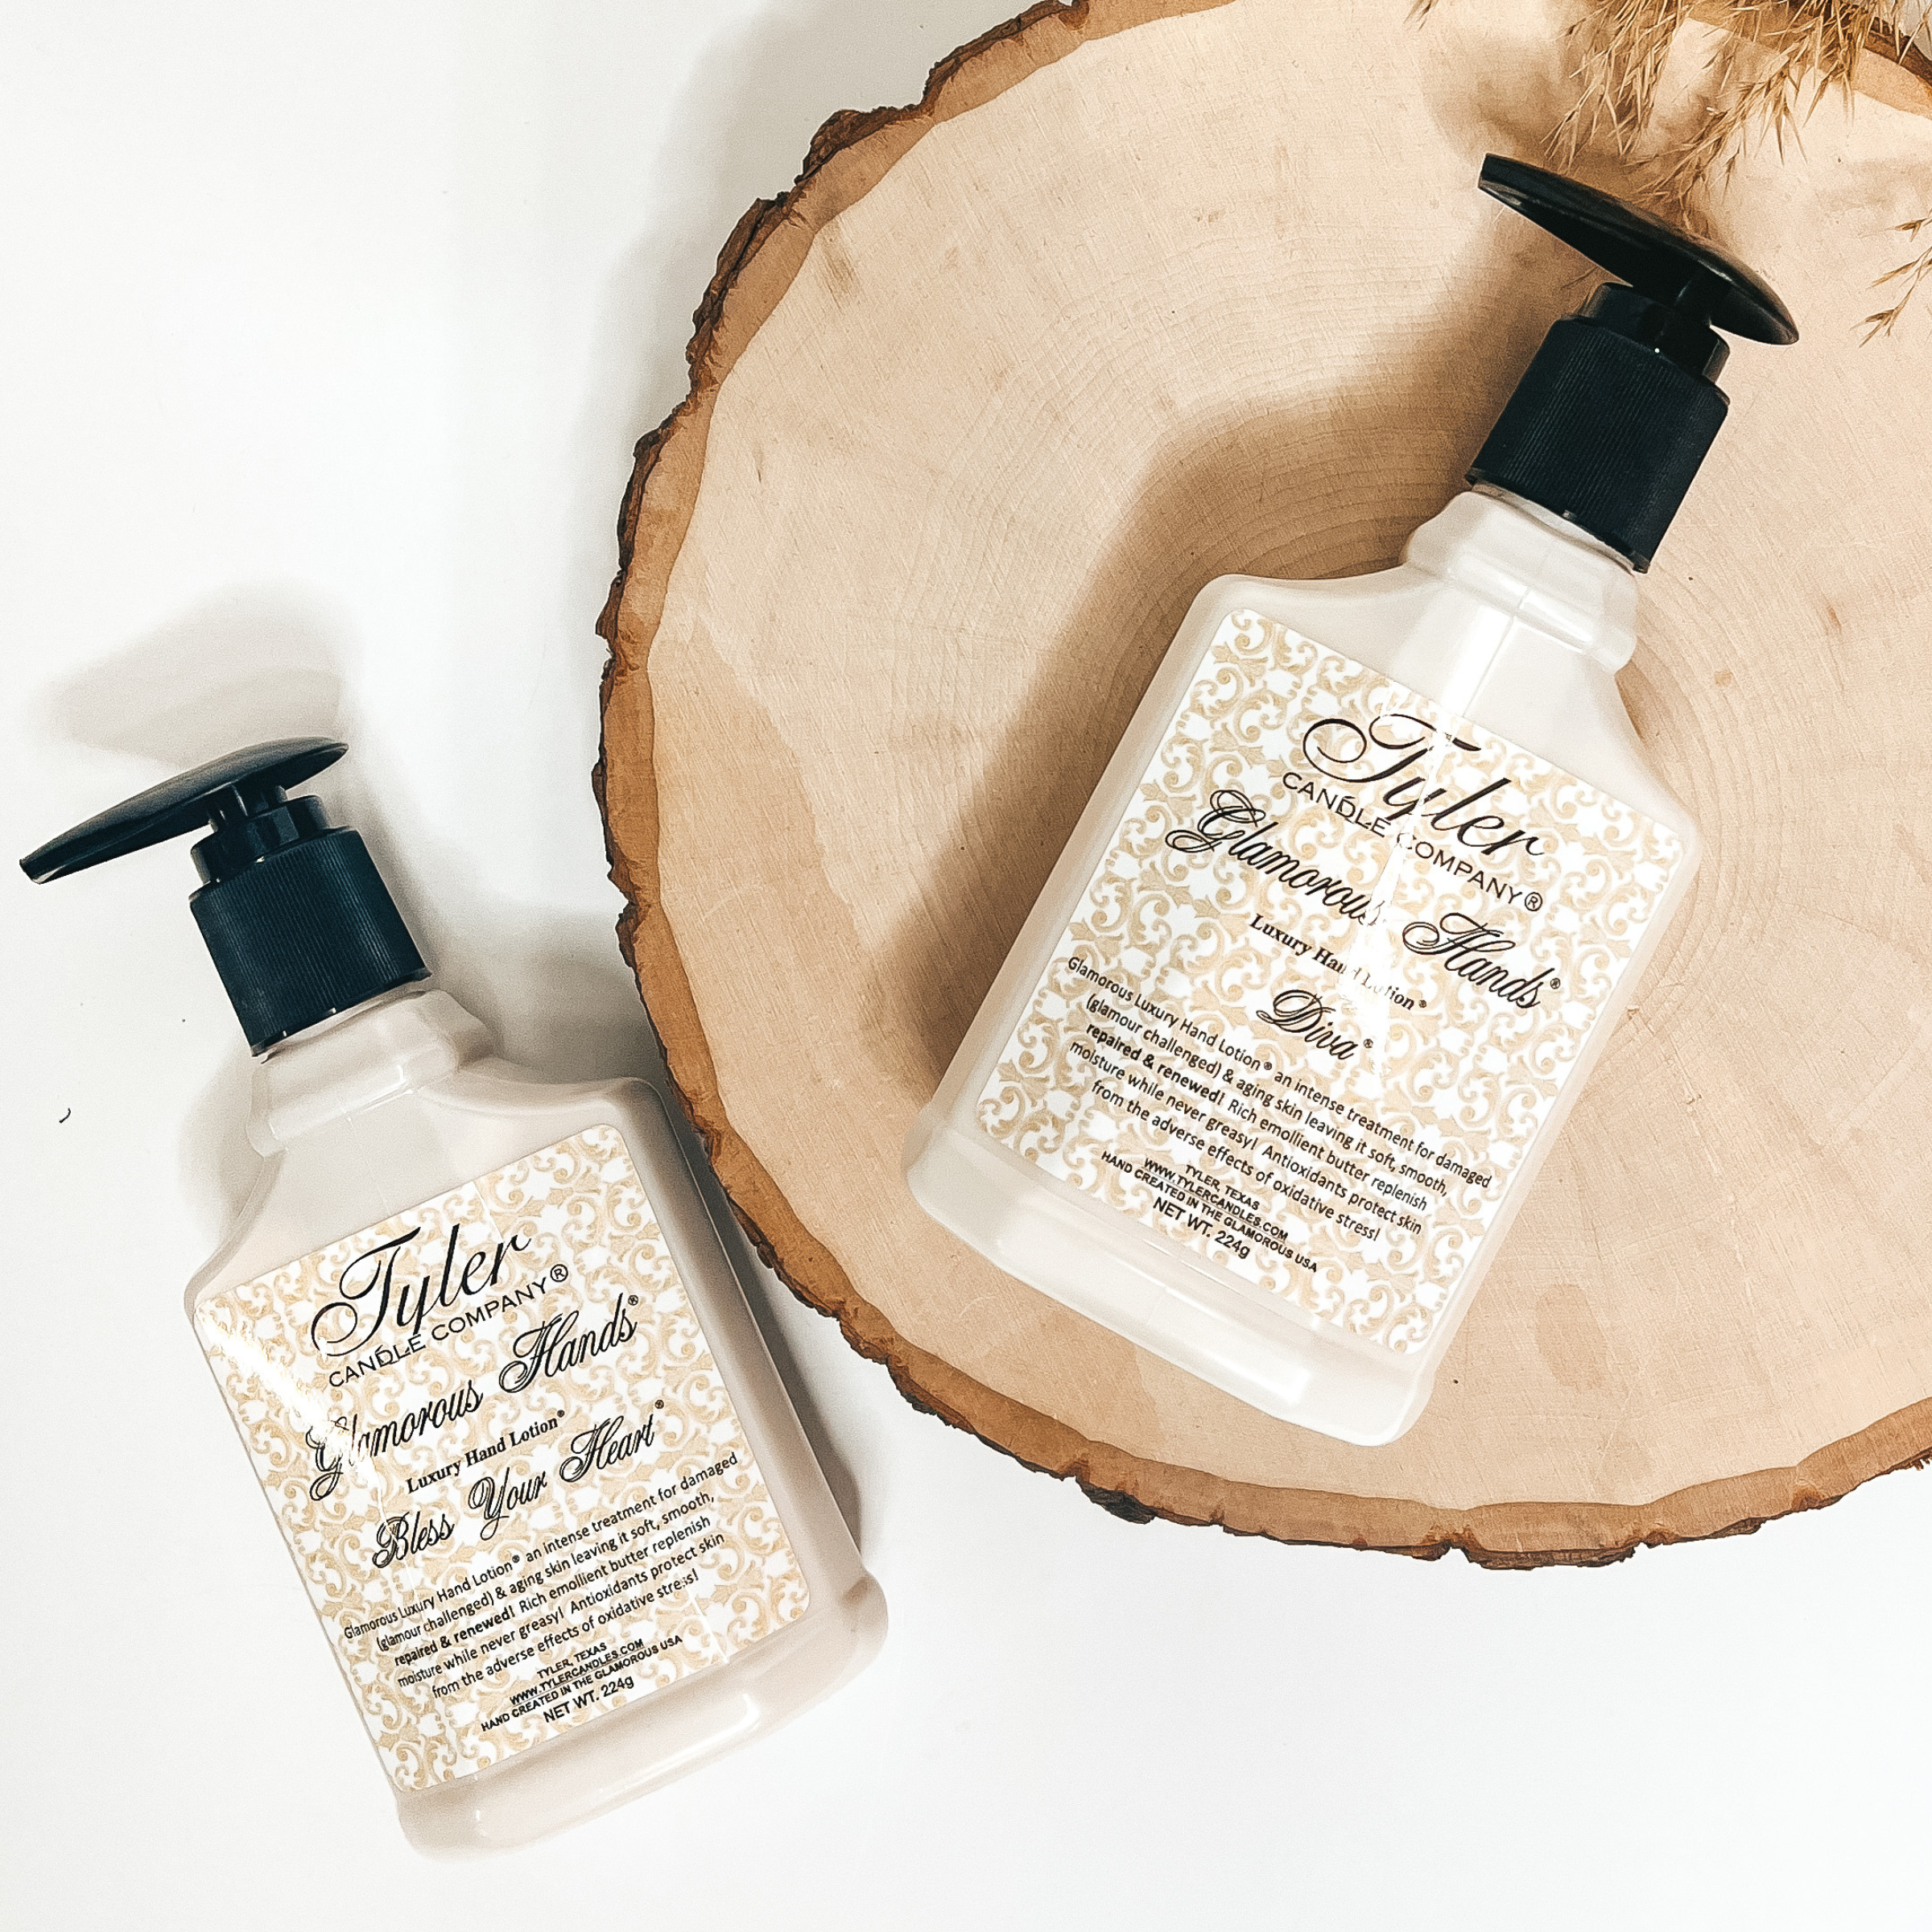 Glamourous hand lotion pictured in 8 oz size of Bless Your Heart and Diva scent pictured on tree wood with a Tyler logo.